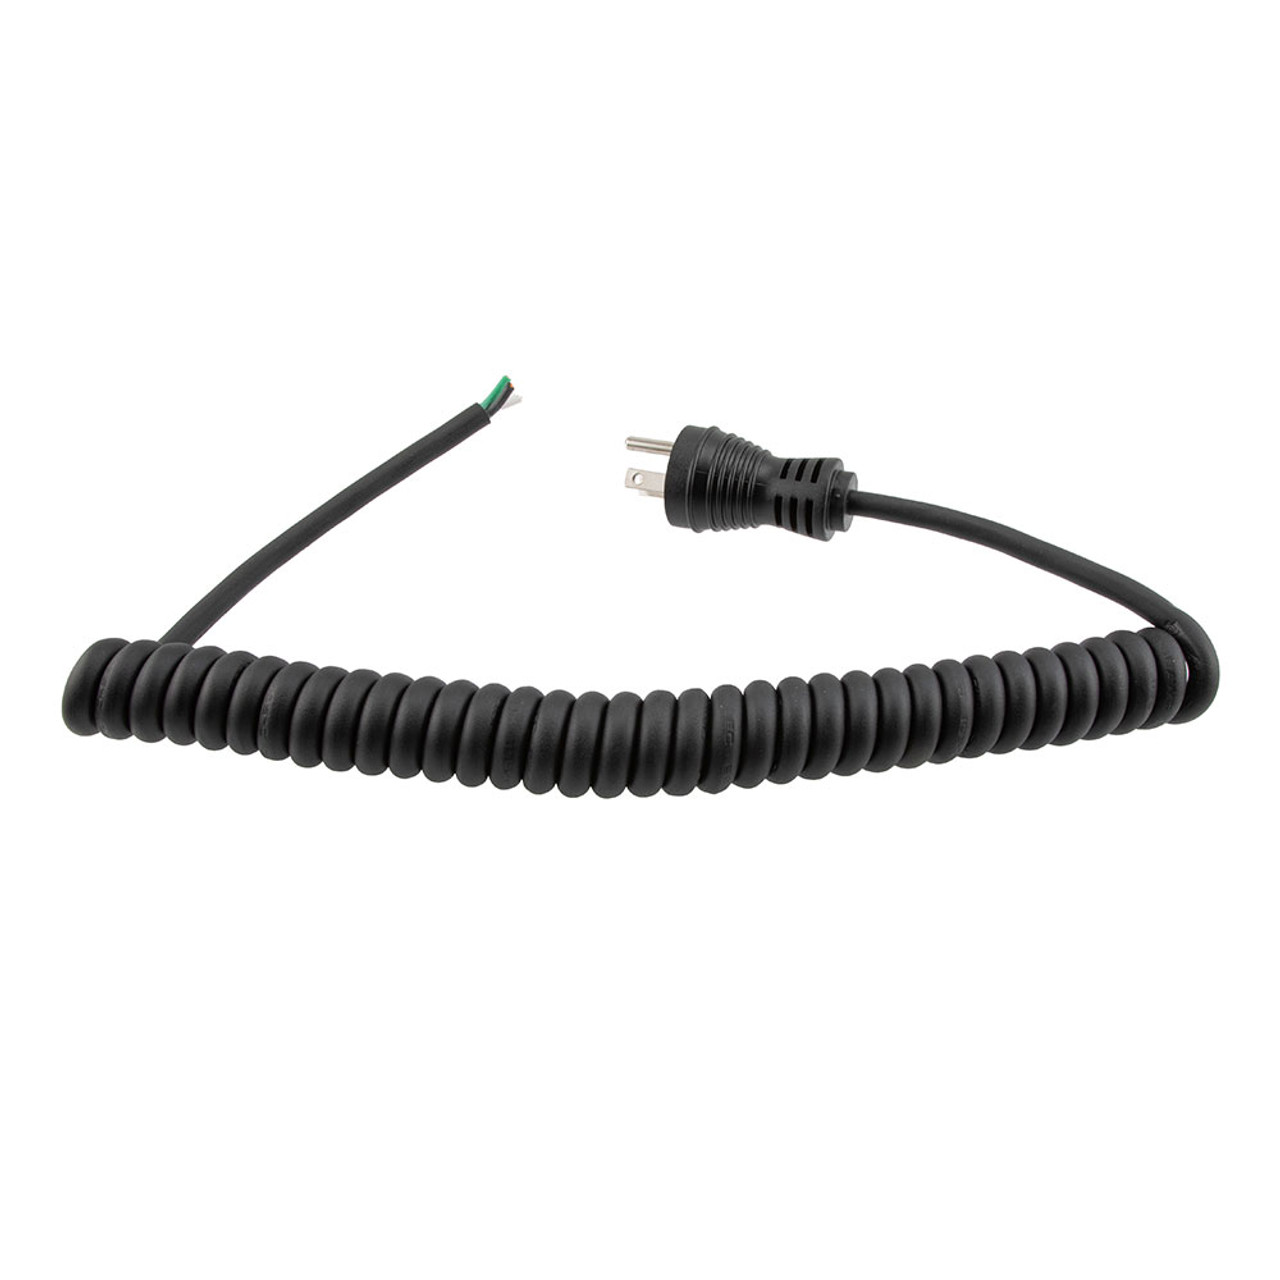 Hospital Grade NEMA 5-15 to Open Coiled Power Cord 18 AWG TPE Jacket, 1 Foot Compressed Length